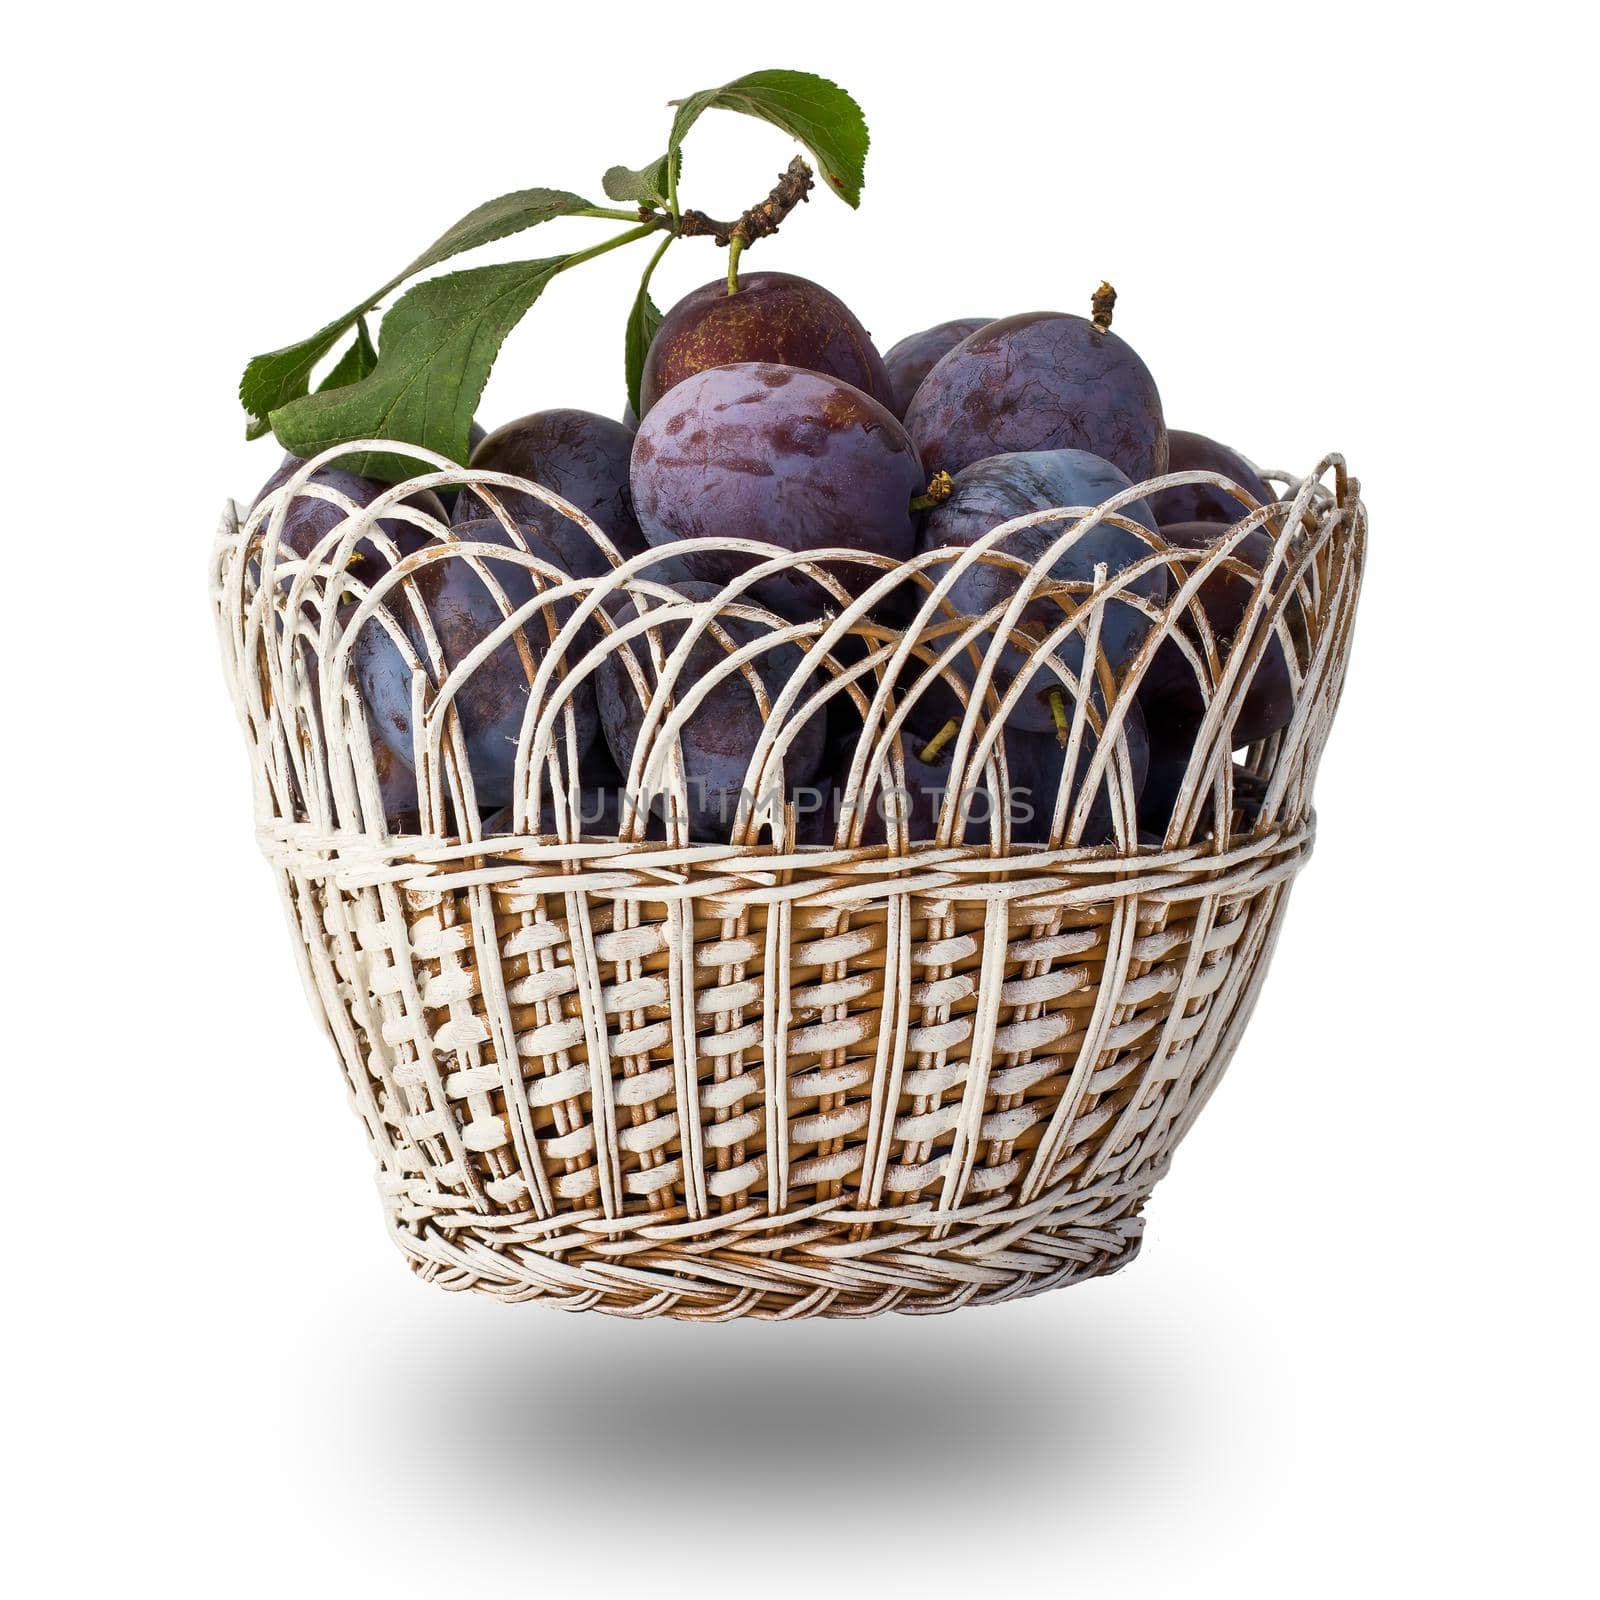 Just picked plums in wicker basket on white isolated backdrop. by mvg6894